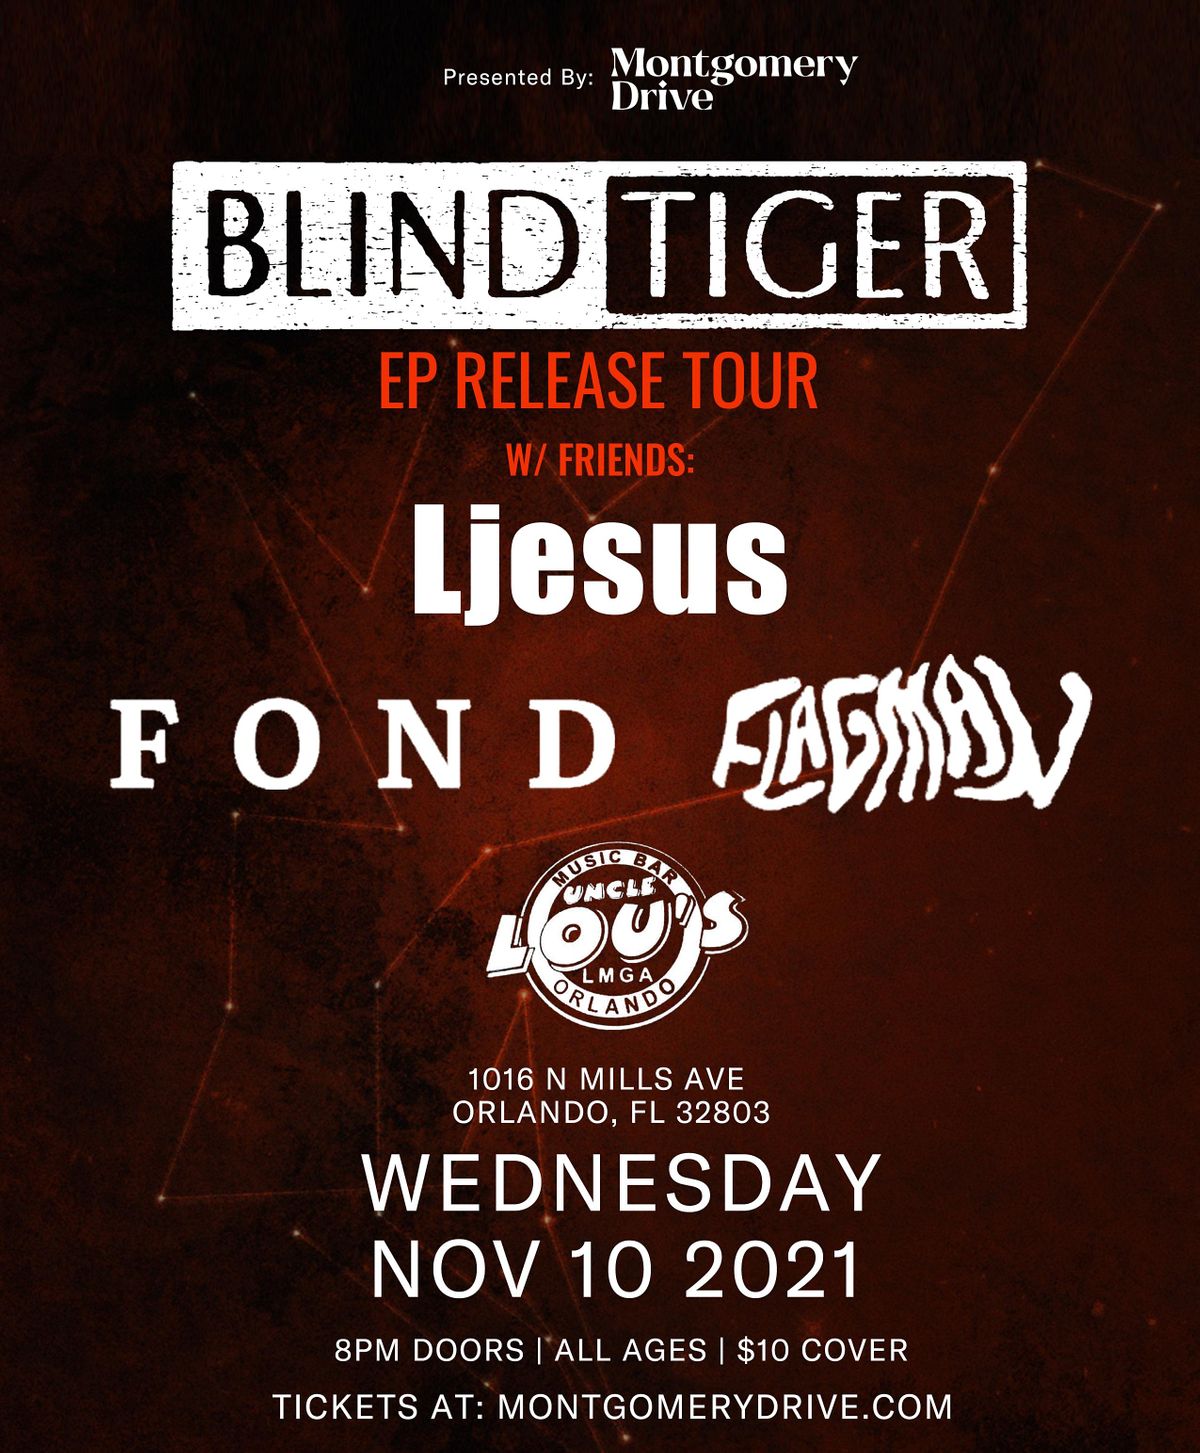 Blind Tiger and Ljesus with Flagman and FOND